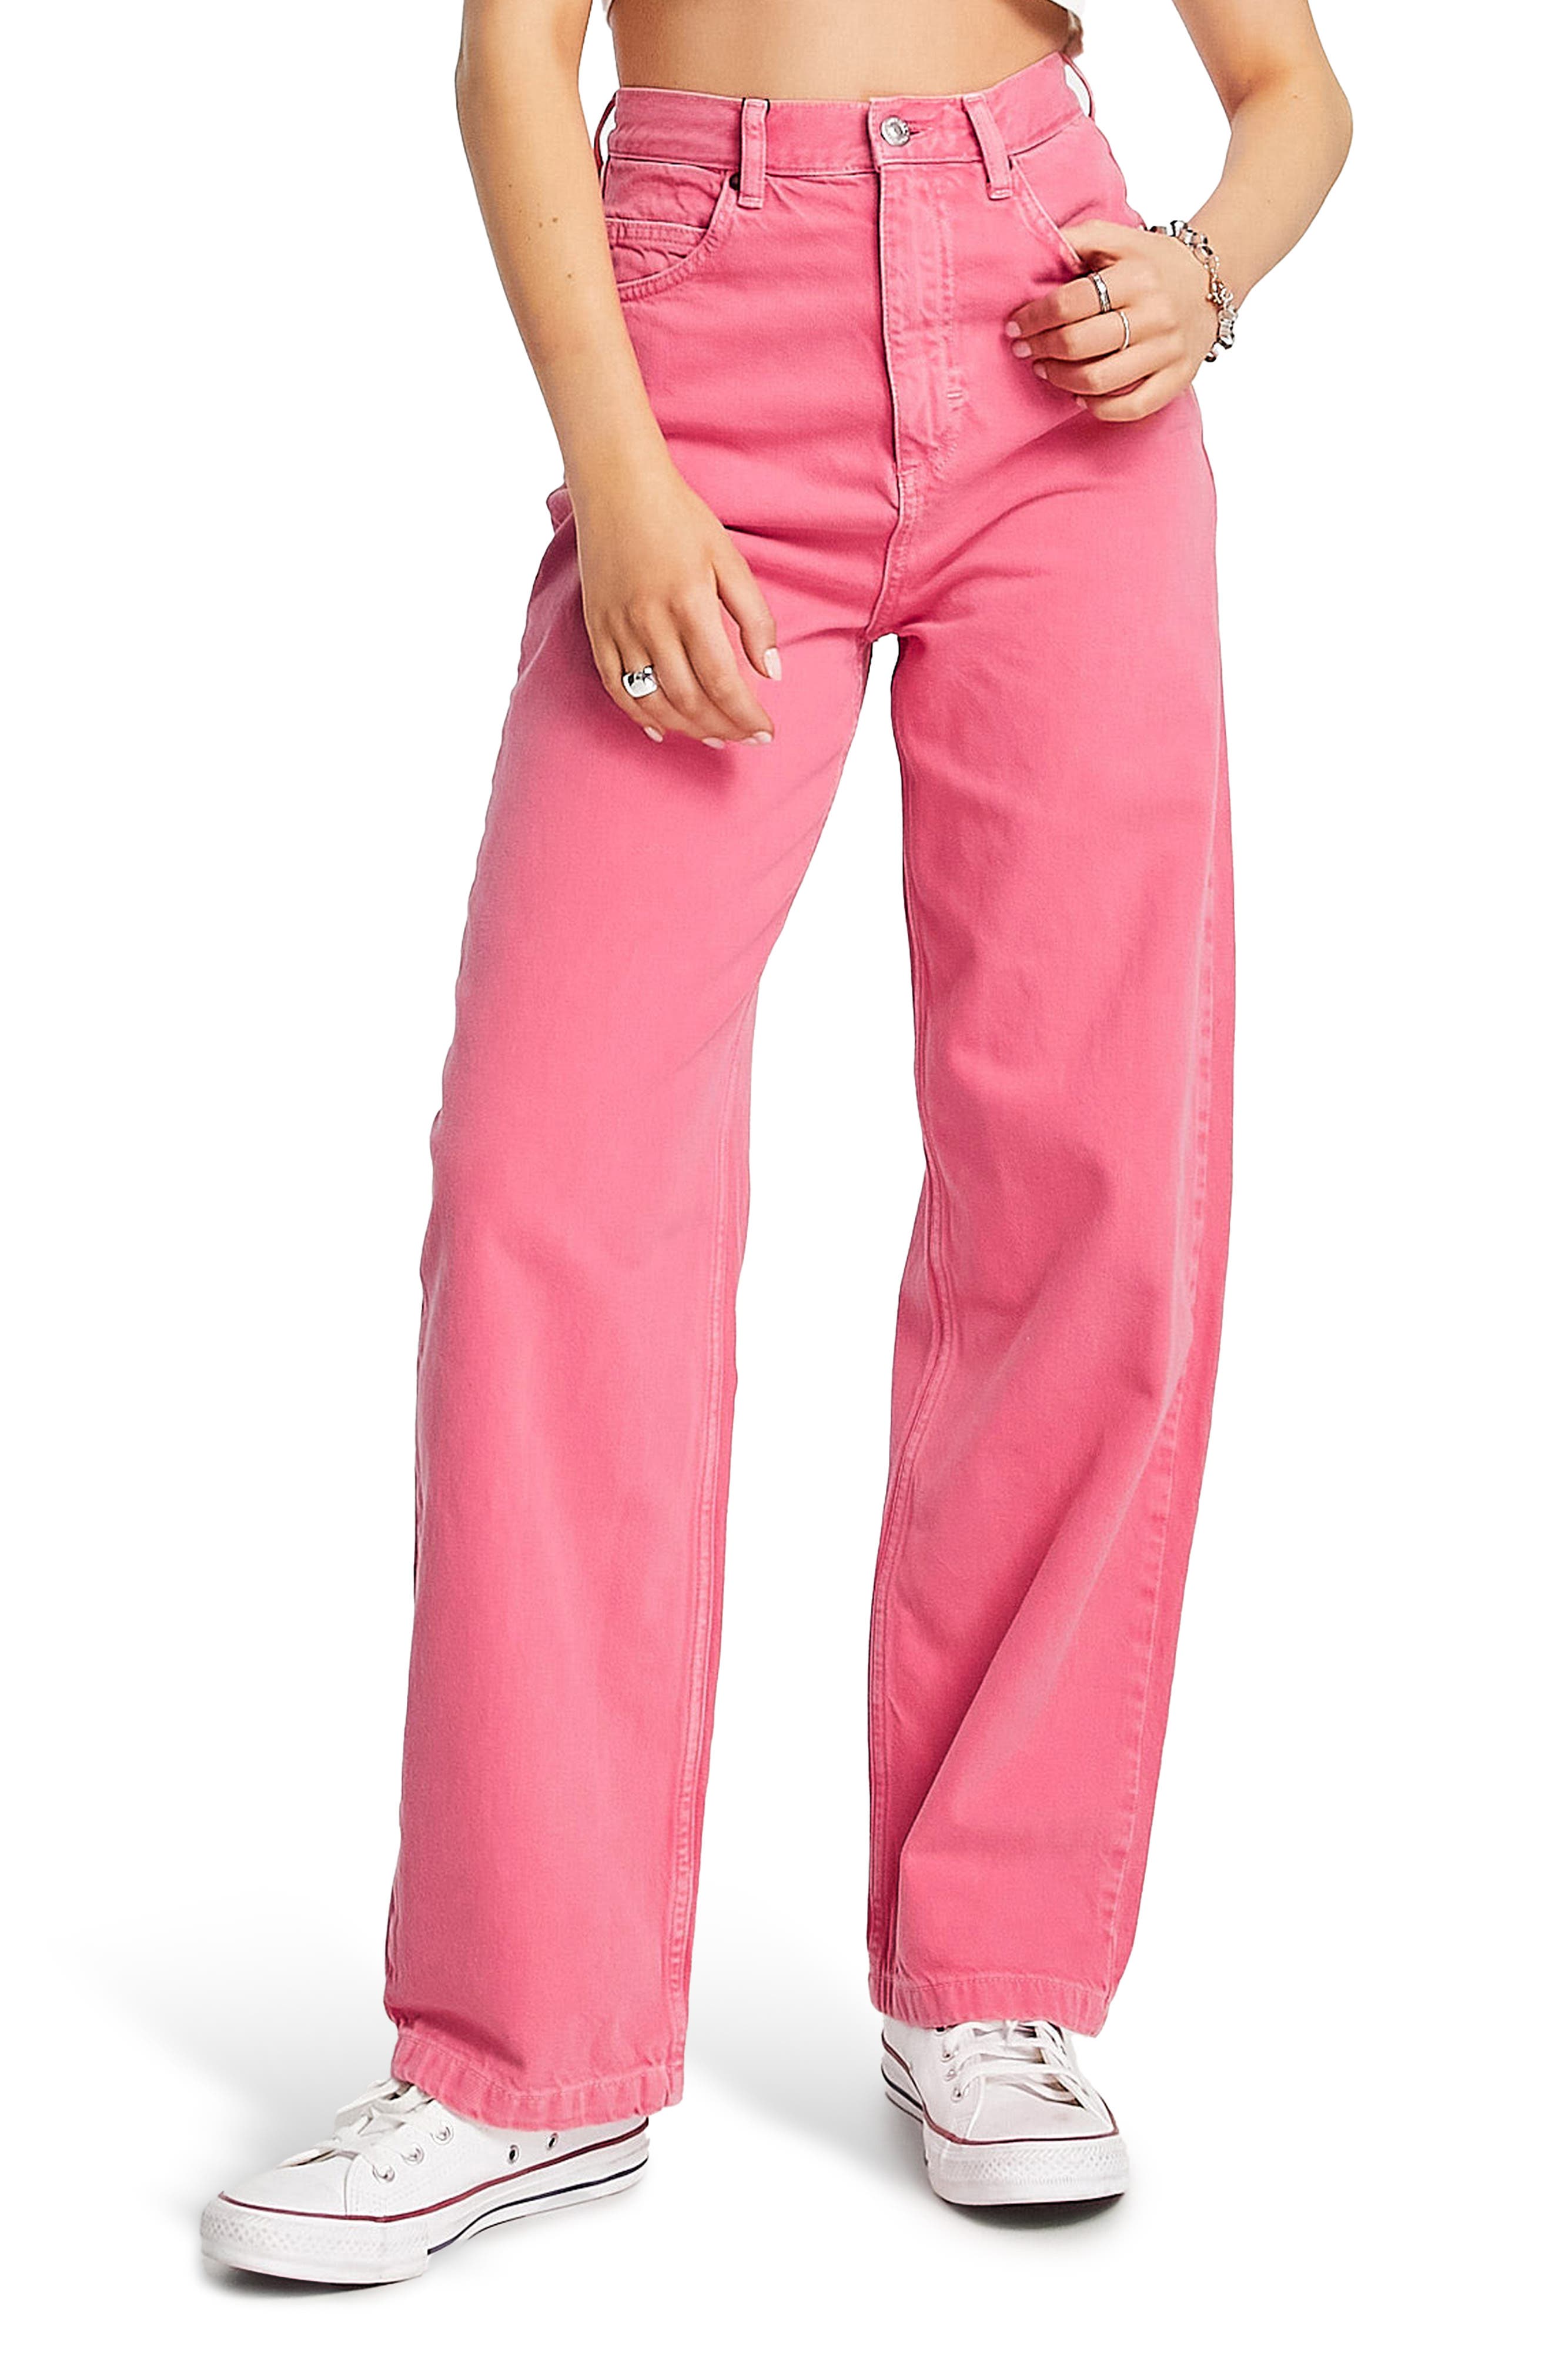 Topshop High Waist Baggy Jeans in Pink